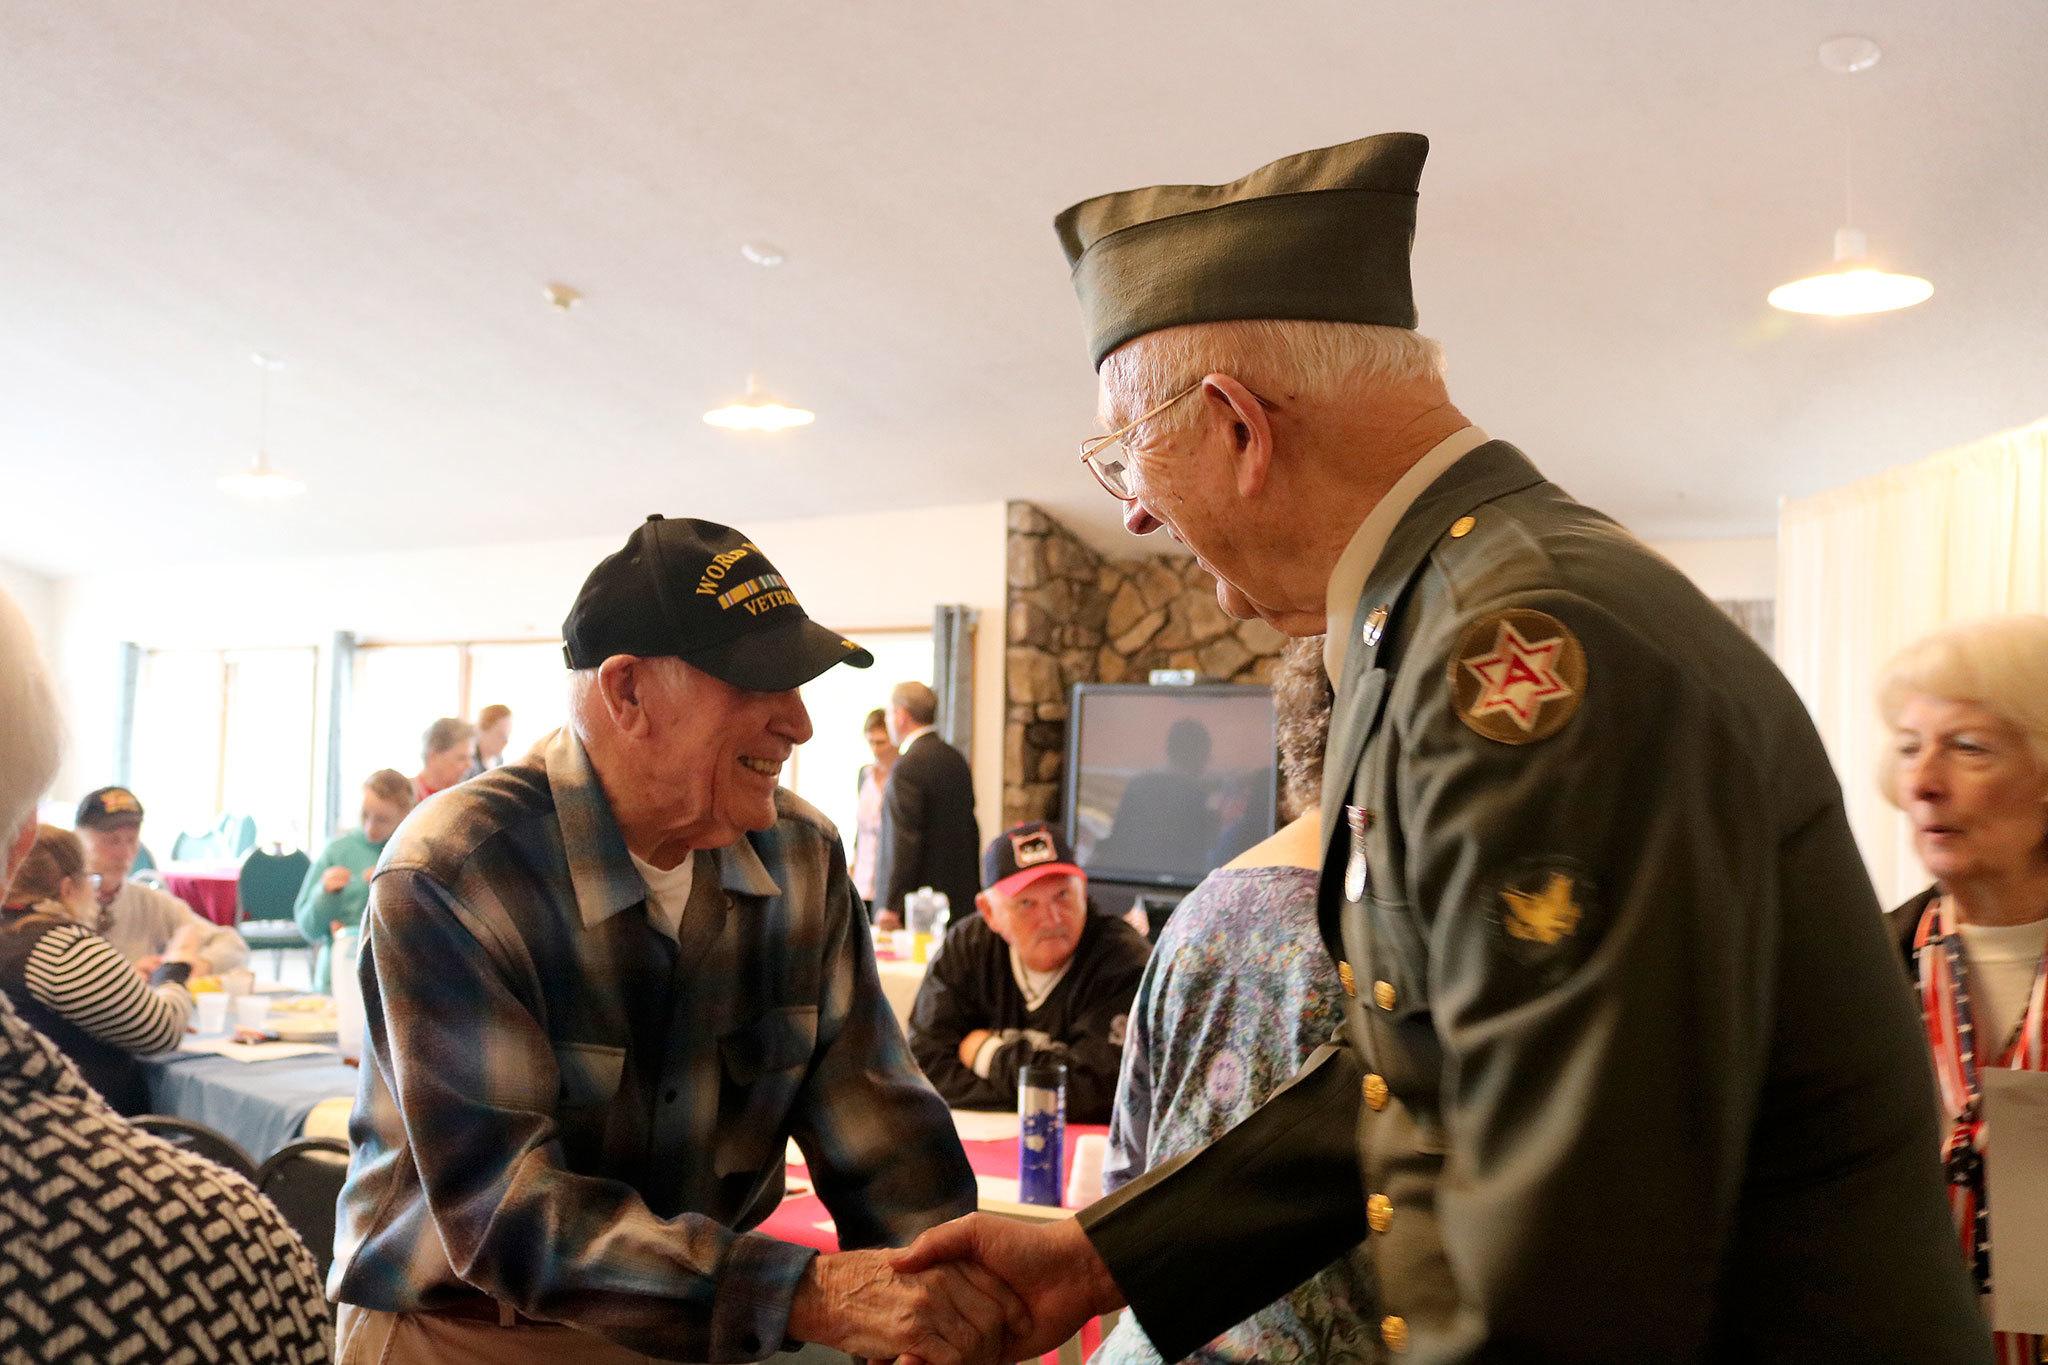 Bob Hamerly and Harley Brumbaugh shake hands at the Mount Si Senior Center after not having seen each other in some time. (Evan Pappas/Staff Photo)